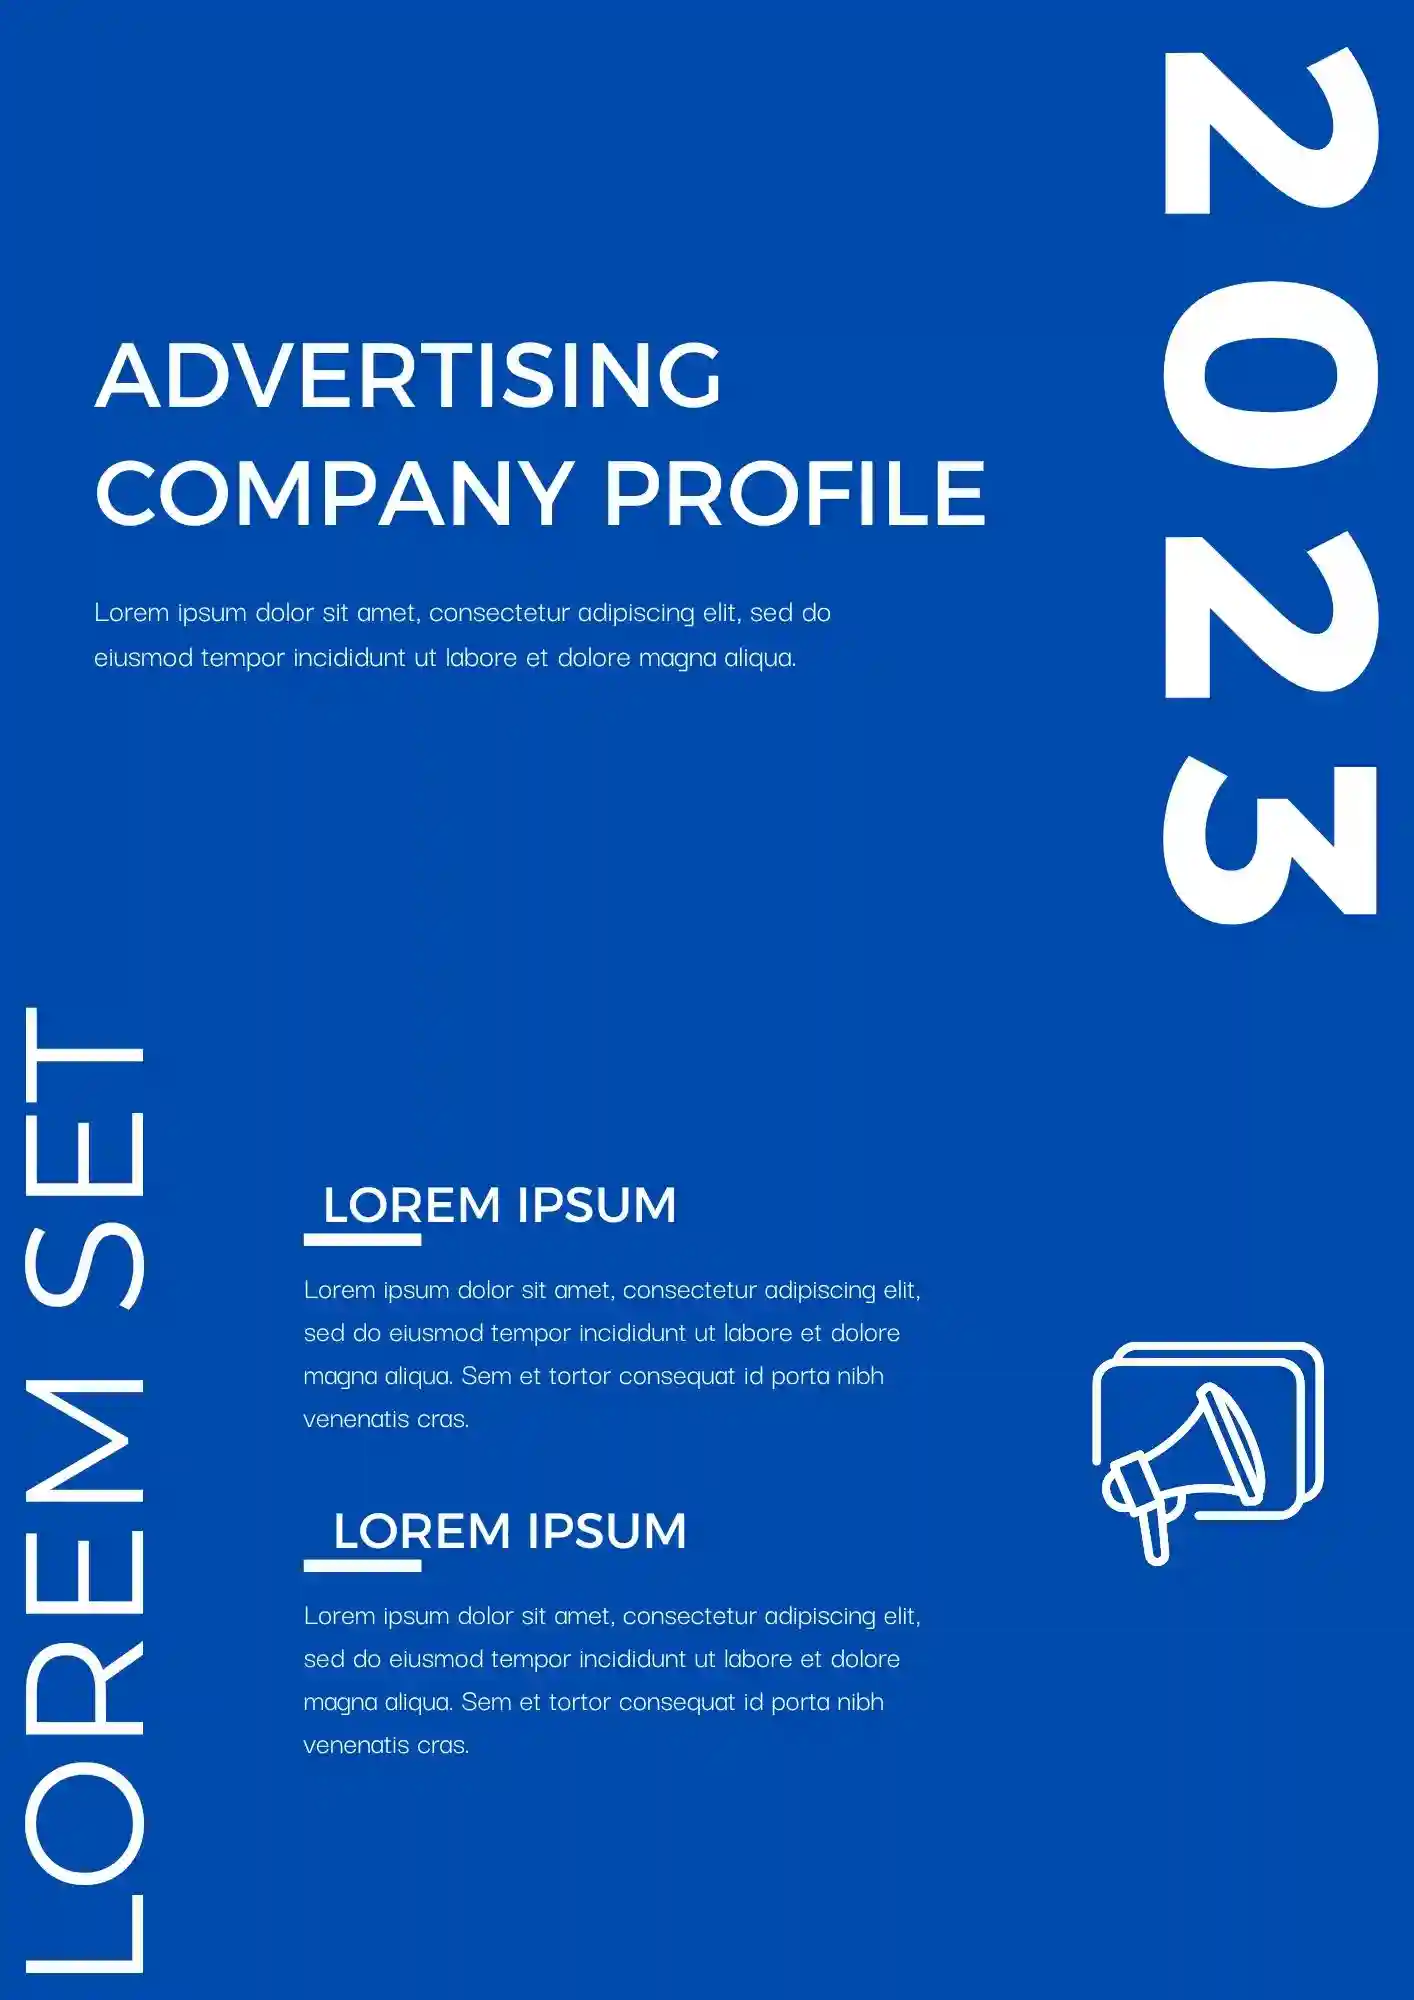 Advertising Company Profile Template